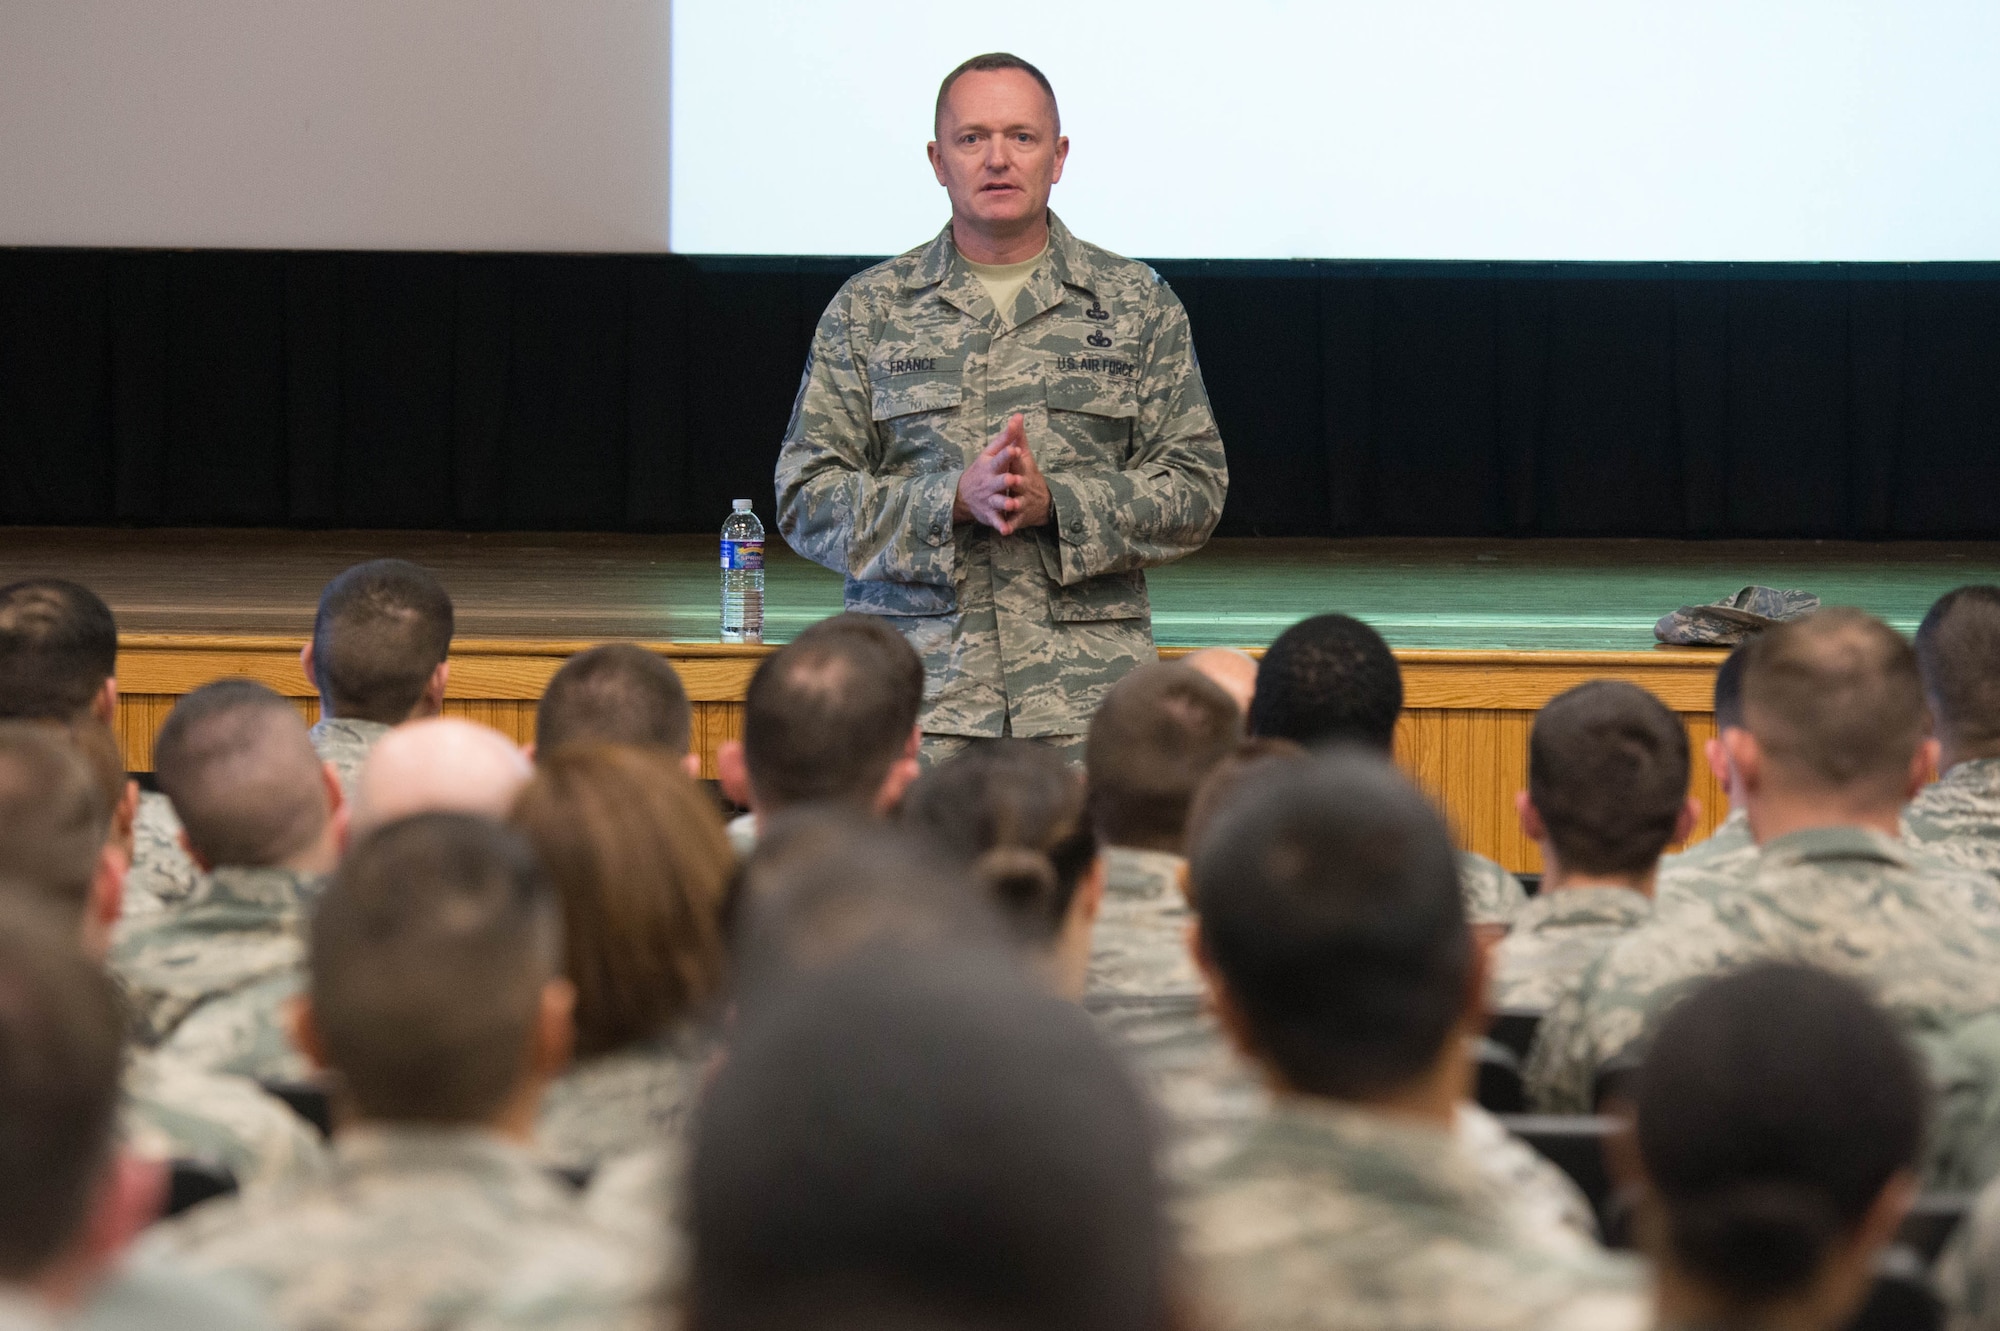 Command Chief Master Sgt. Jason France, Air Force Materiel Command's command chief, talks with Airmen during an Enlisted Call at the base theater Dec.1. During the one-hour session, the command's senior enlisted member shared his thoughts on a number of topics that affect enlisted personnel. (U.S. Air Force photo by Jerry Saslav)